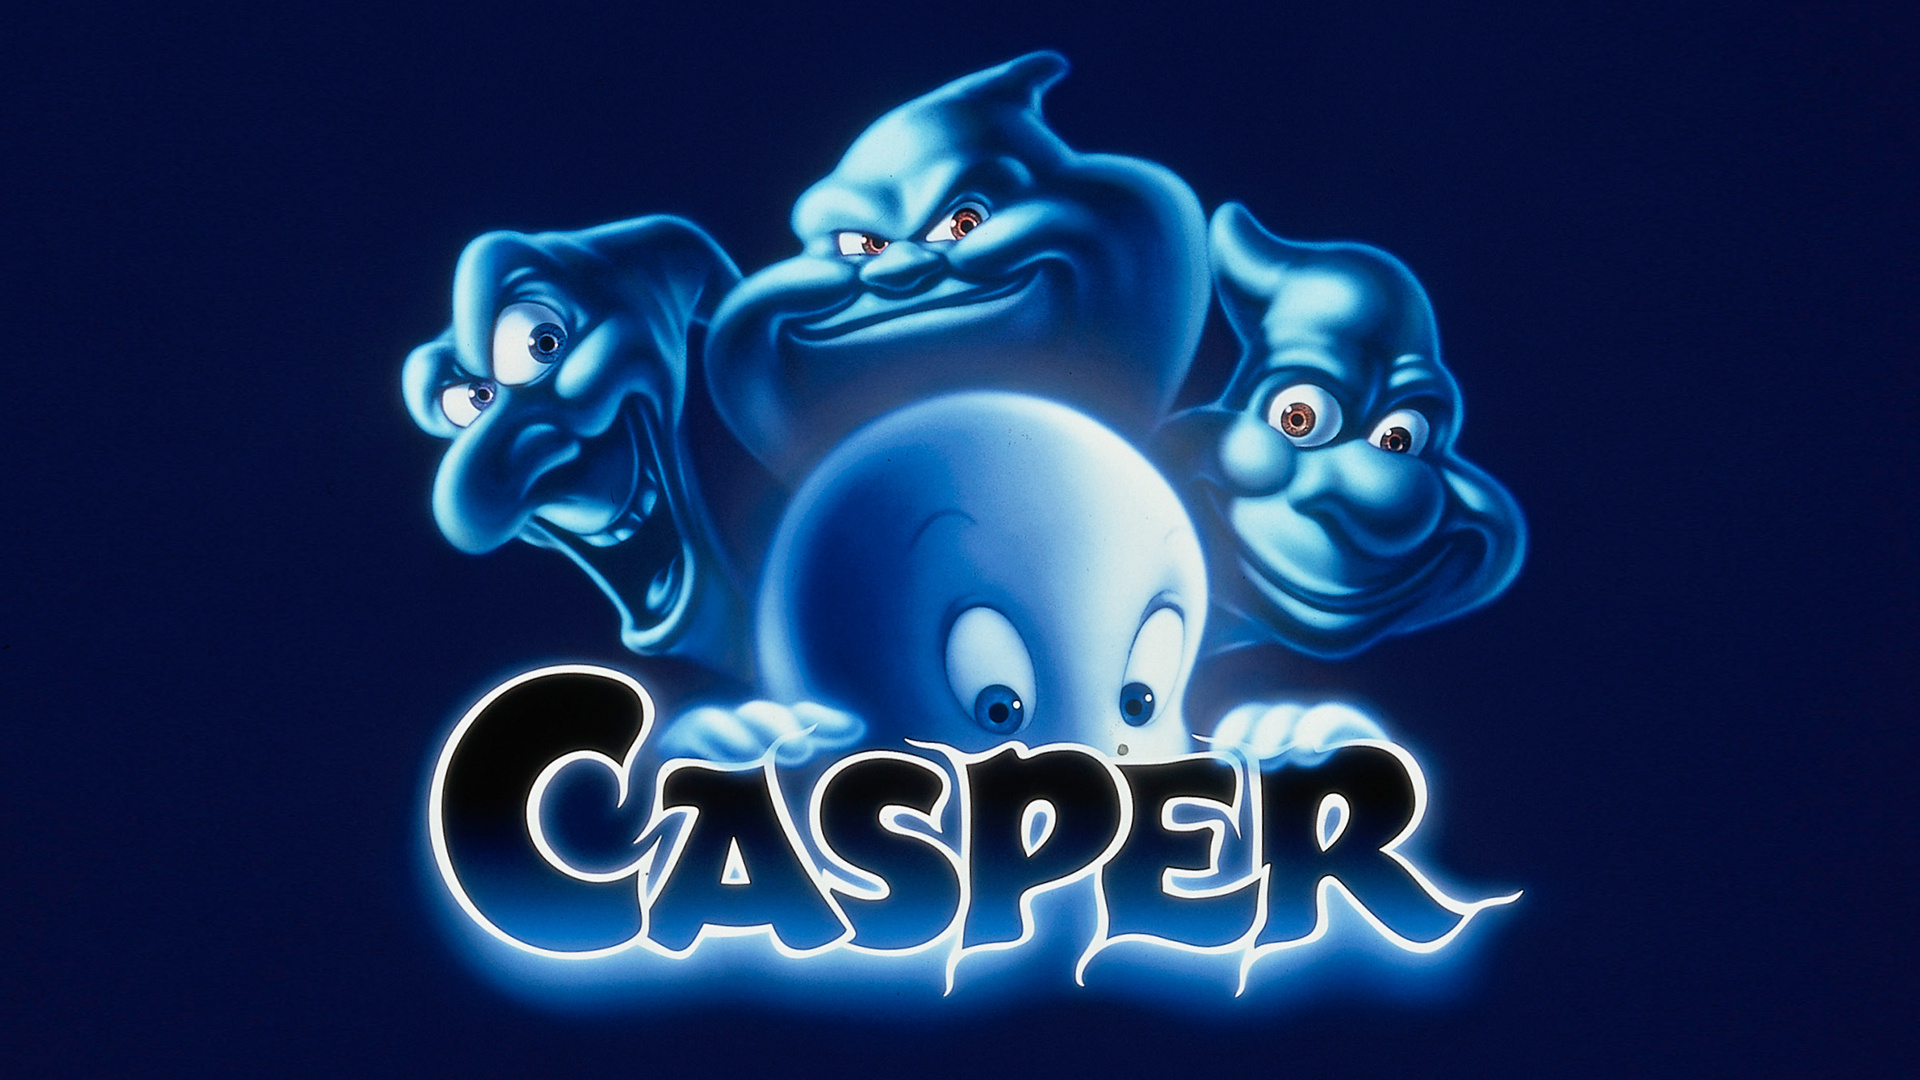 Casper (Movie): A children's film with an animated ghost trying to find a friend for the afterlife. 1920x1080 Full HD Wallpaper.